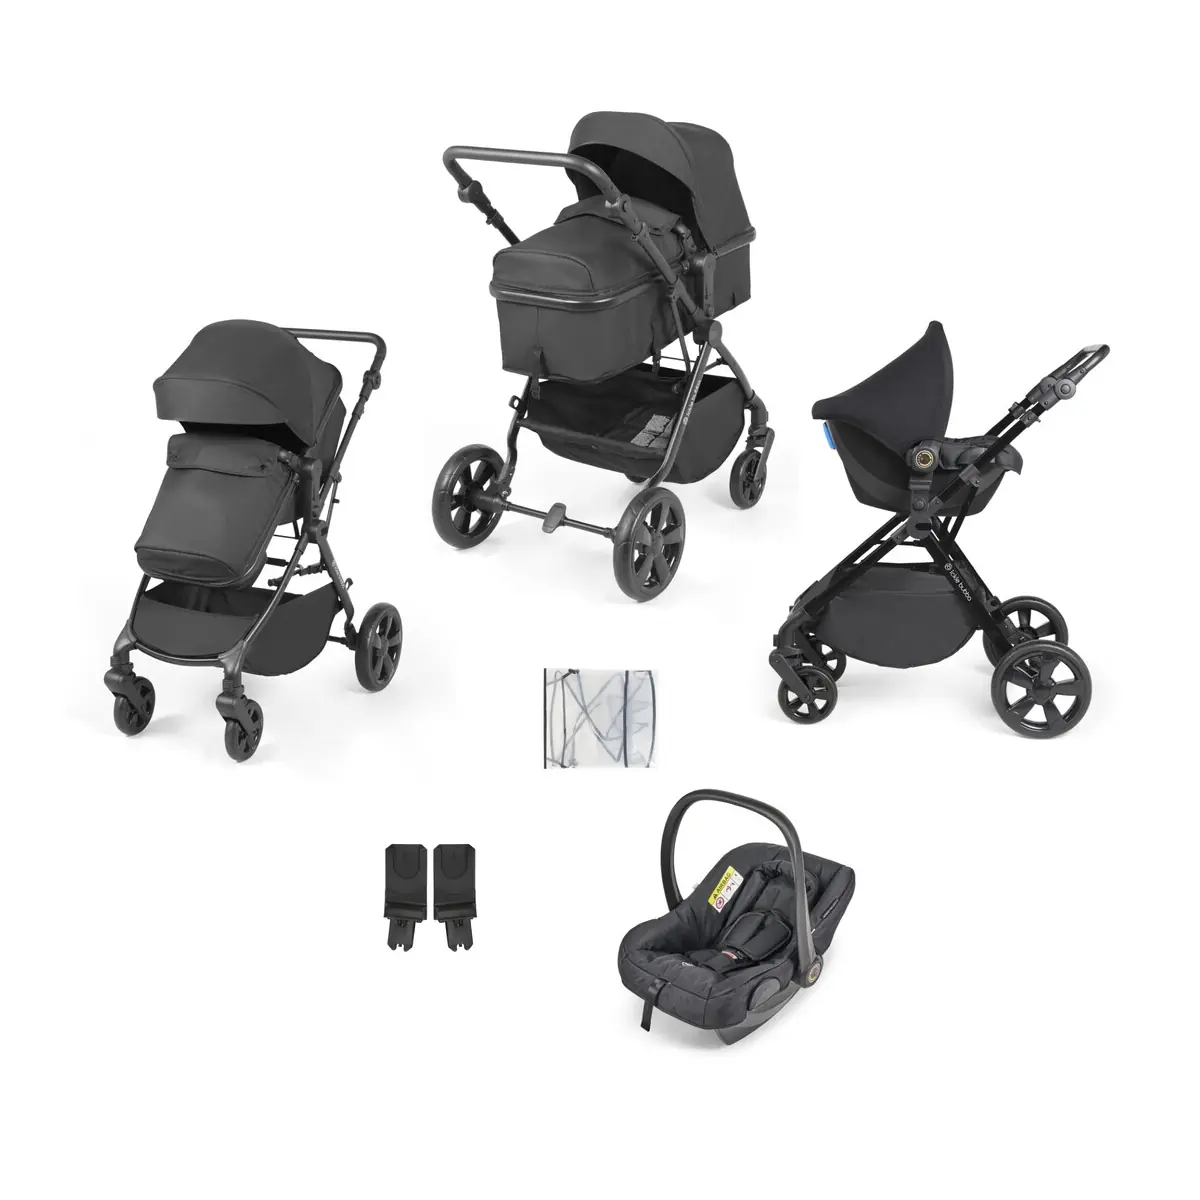 Ickle Bubba Comet All-in-One Travel System with Astral Car Seat - Black from Kiddies Kingdom